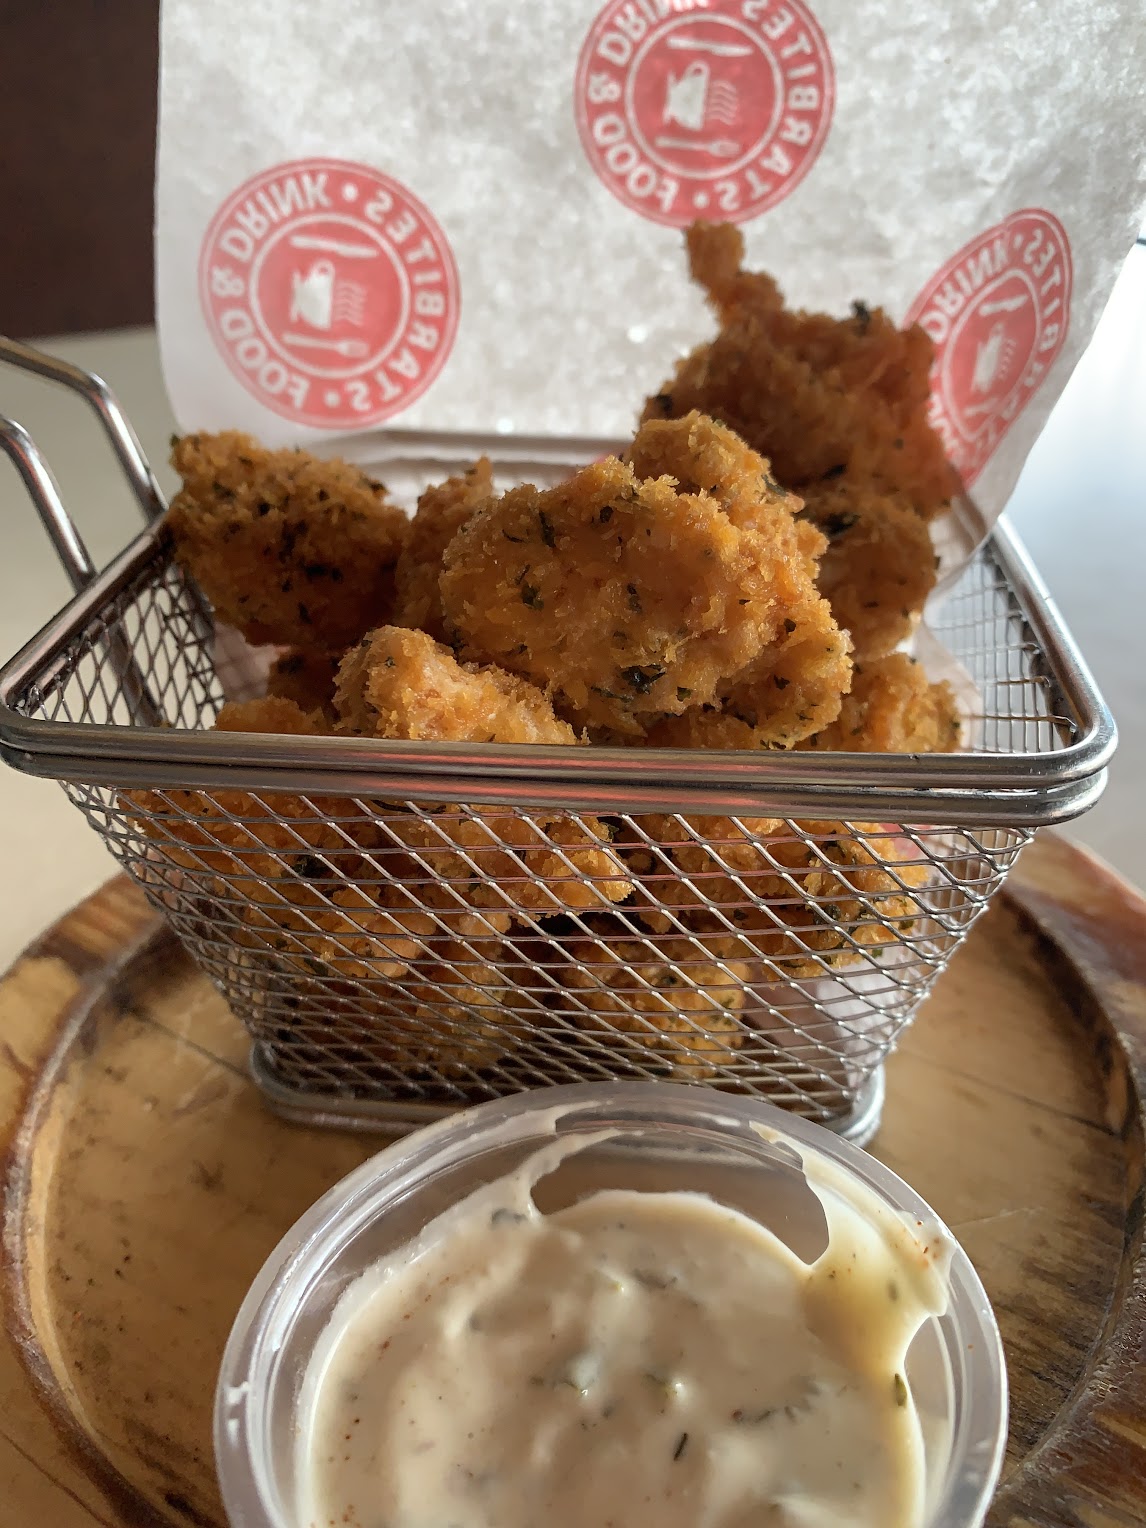 An image of a bin filled with deep-fried chicken bites and a sauce on the side. 